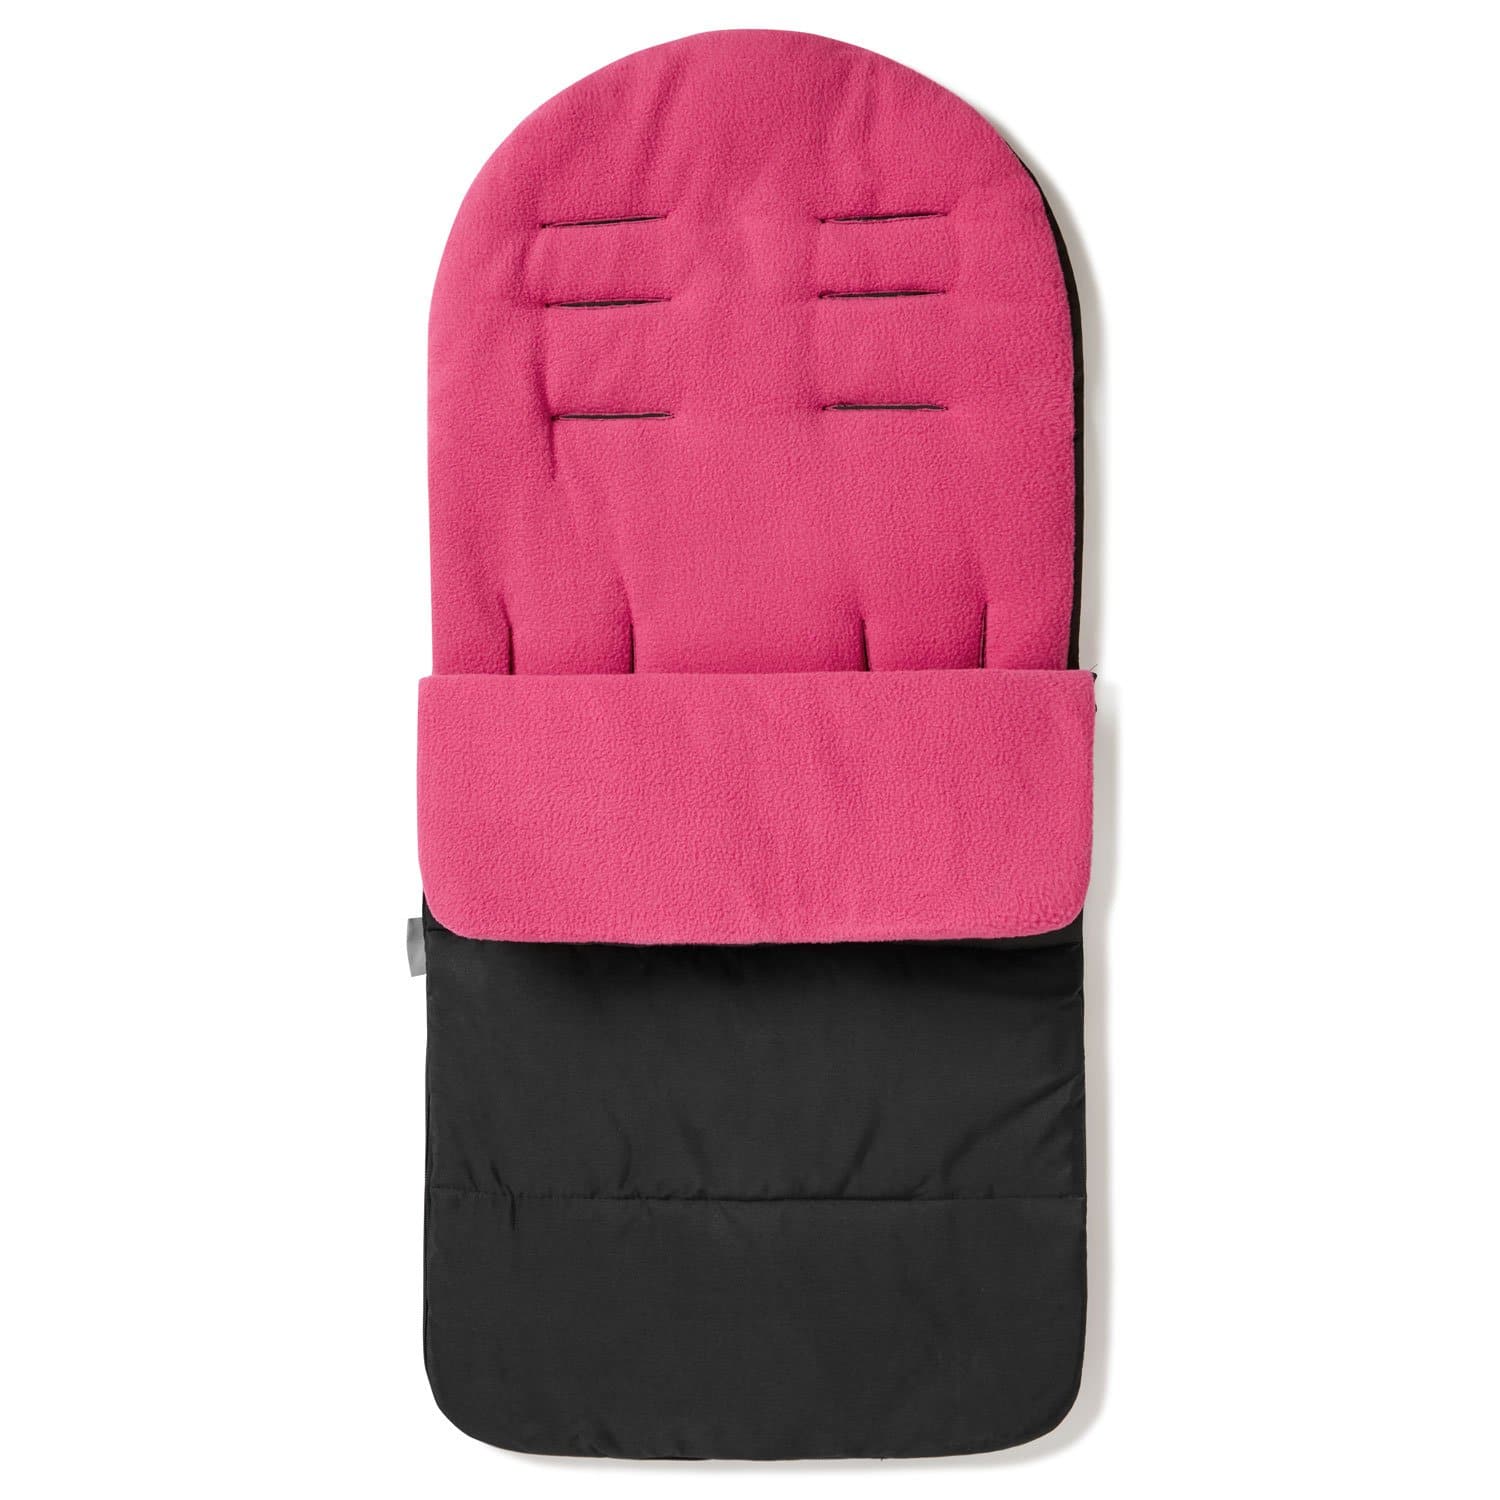 Premium Footmuff / Cosy Toes Compatible with Combi - For Your Little One